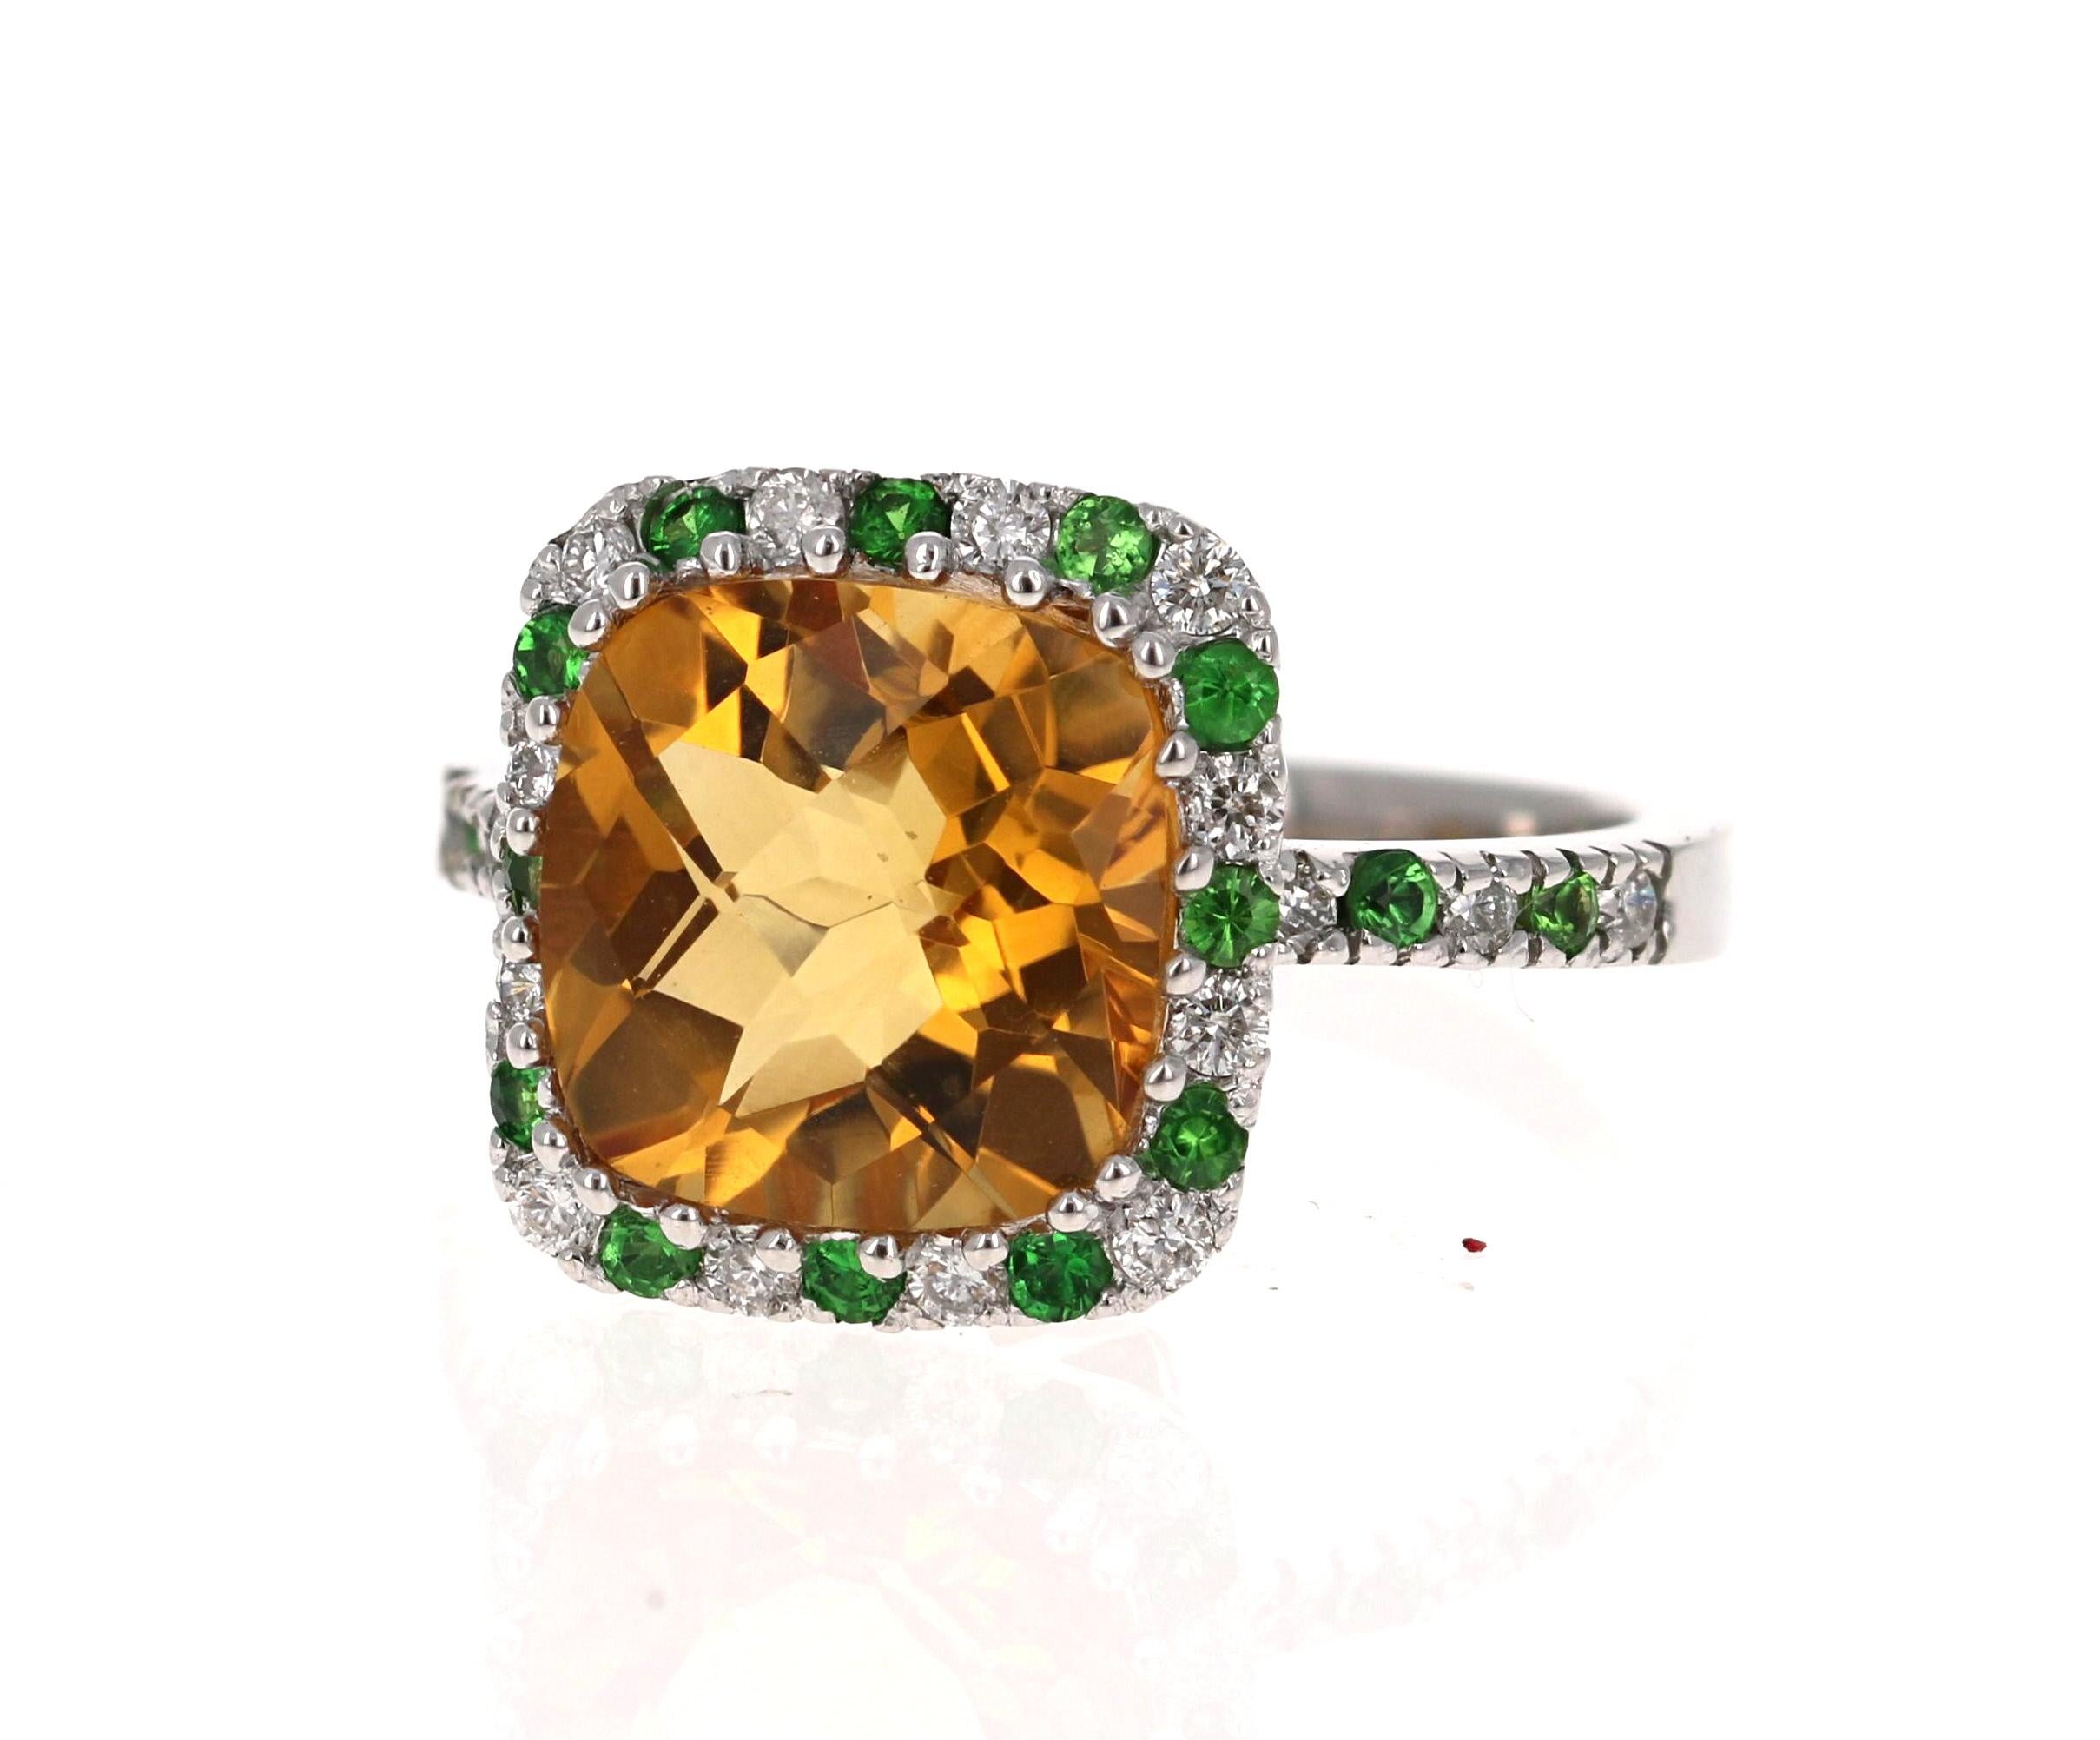 Beautiful to say the Least! This magnificent Cushion Cut Citrine Quartz weighs 4.23 Carats and is surrounded by alternating Round Cut Diamonds that weigh 0.28 Carats (Clarity: SI, Color: F) and Round Cut Tsavorites that weigh 0.31 Carats. The total